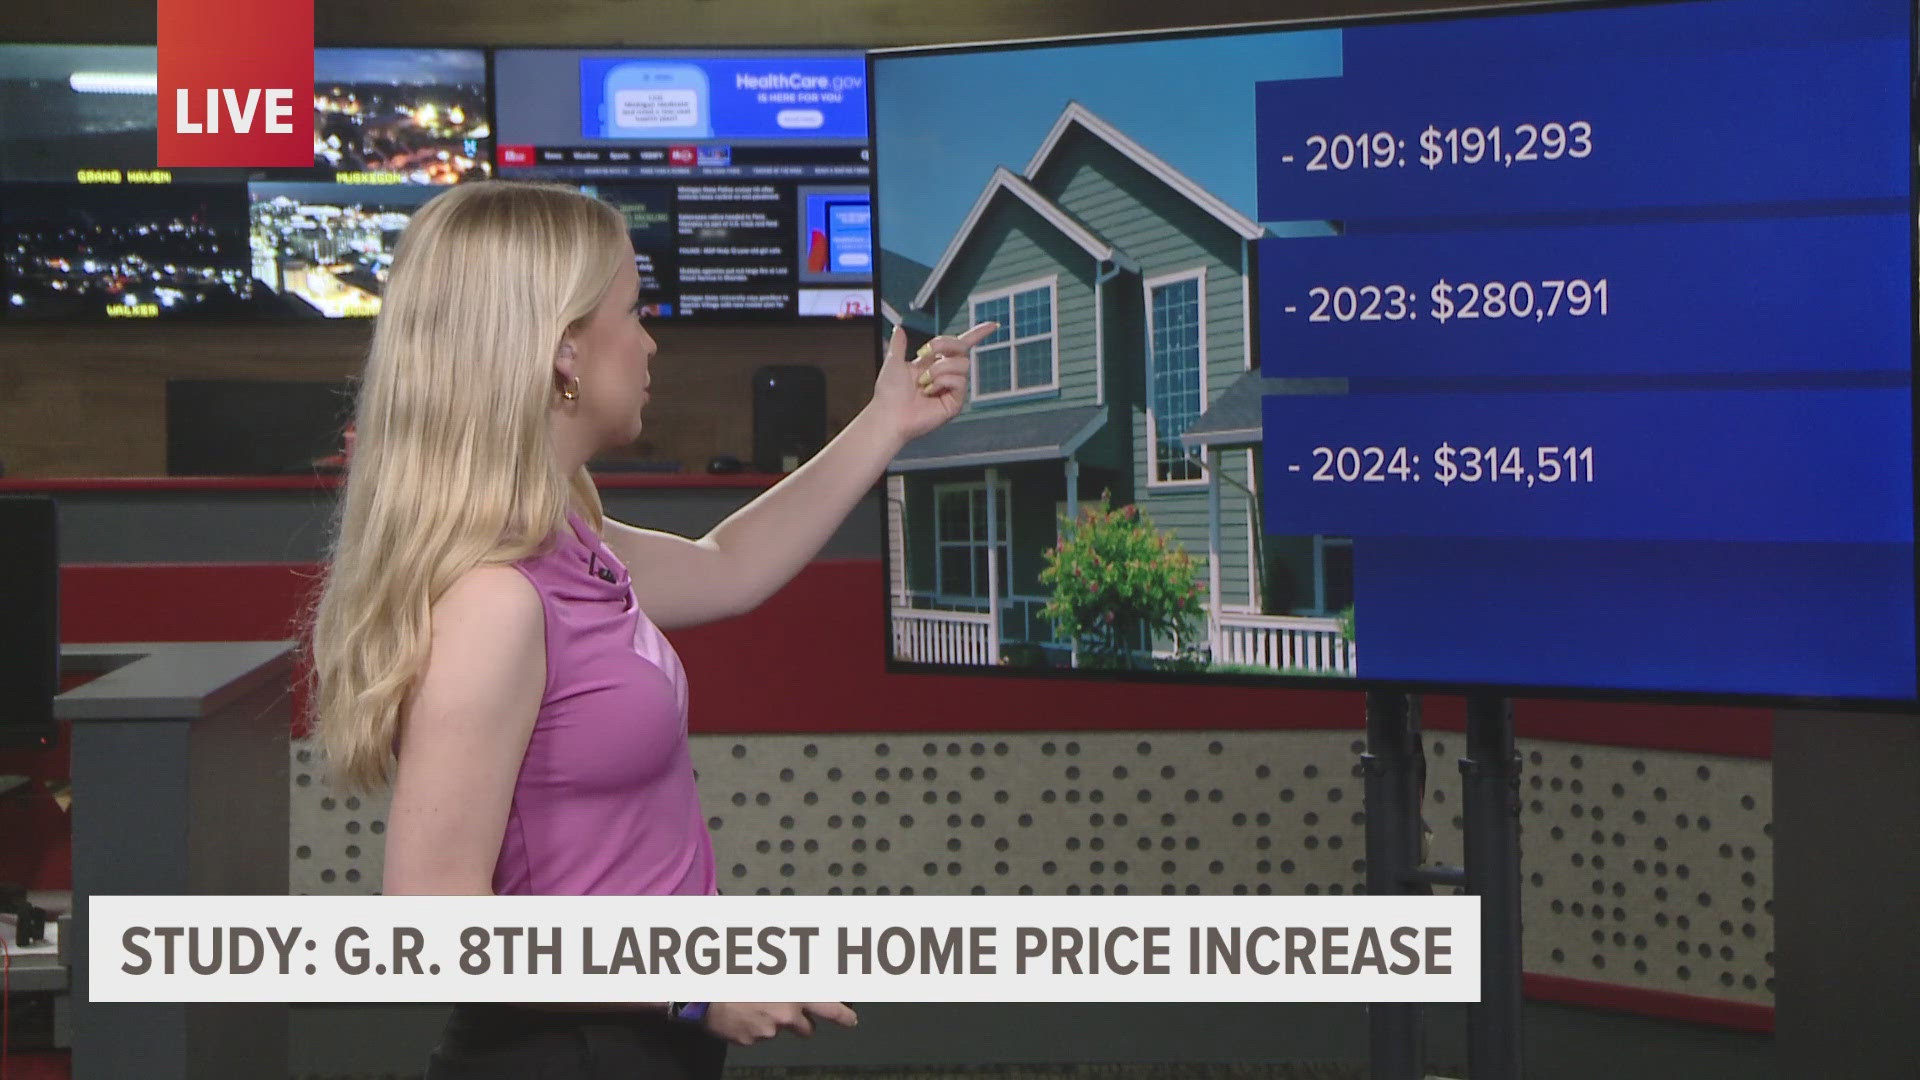 The study, from Smart Asset, found the average home in Grand Rapids sold for 12% more this year compared to last year.